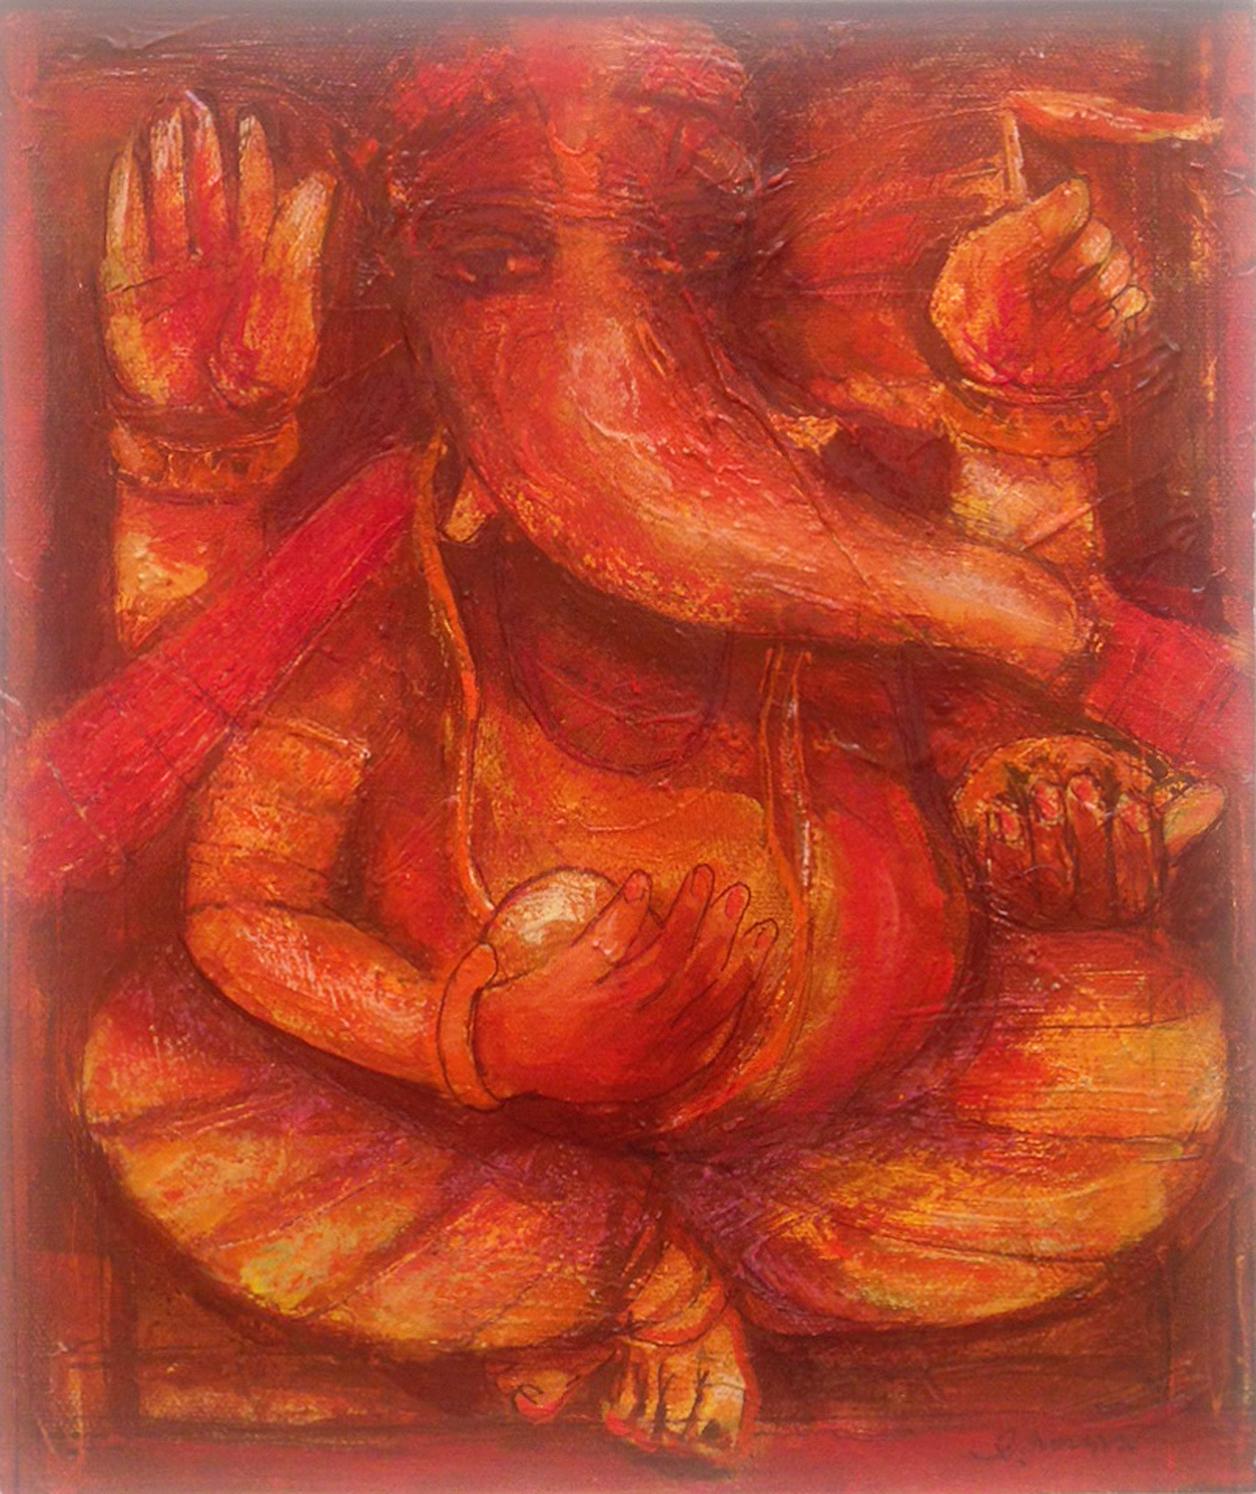 Arup Das Interior Painting - Ganesha, Mythology, Hindu God, Acrylic on canvas, Red by Indian Artist"In Stock"